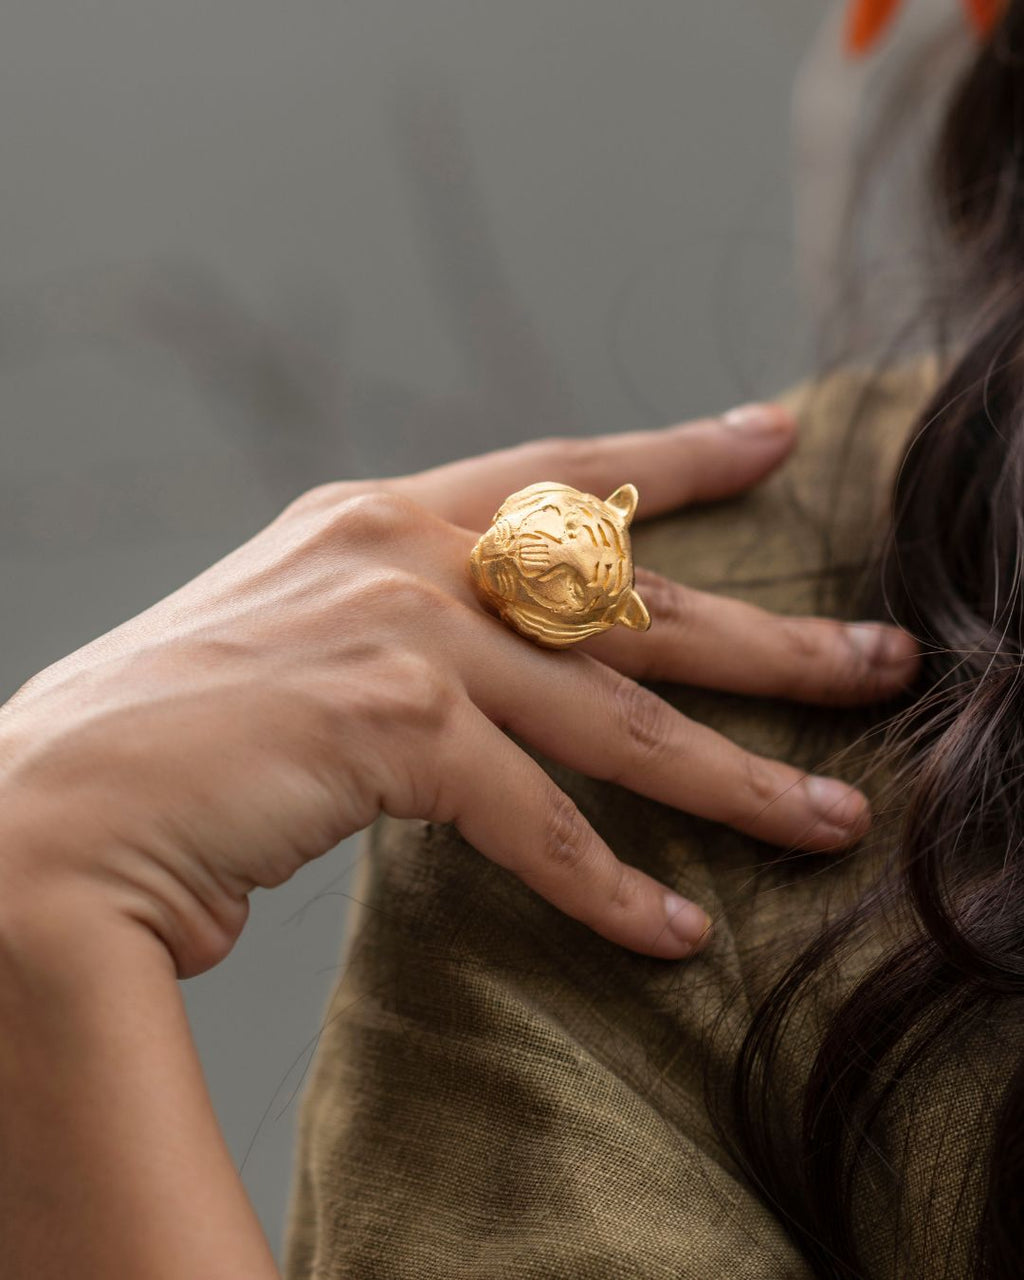 Tigris Ring - Rings - Handcrafted Jewellery - Made in India - Dubai Jewellery, Fashion & Lifestyle - Dori